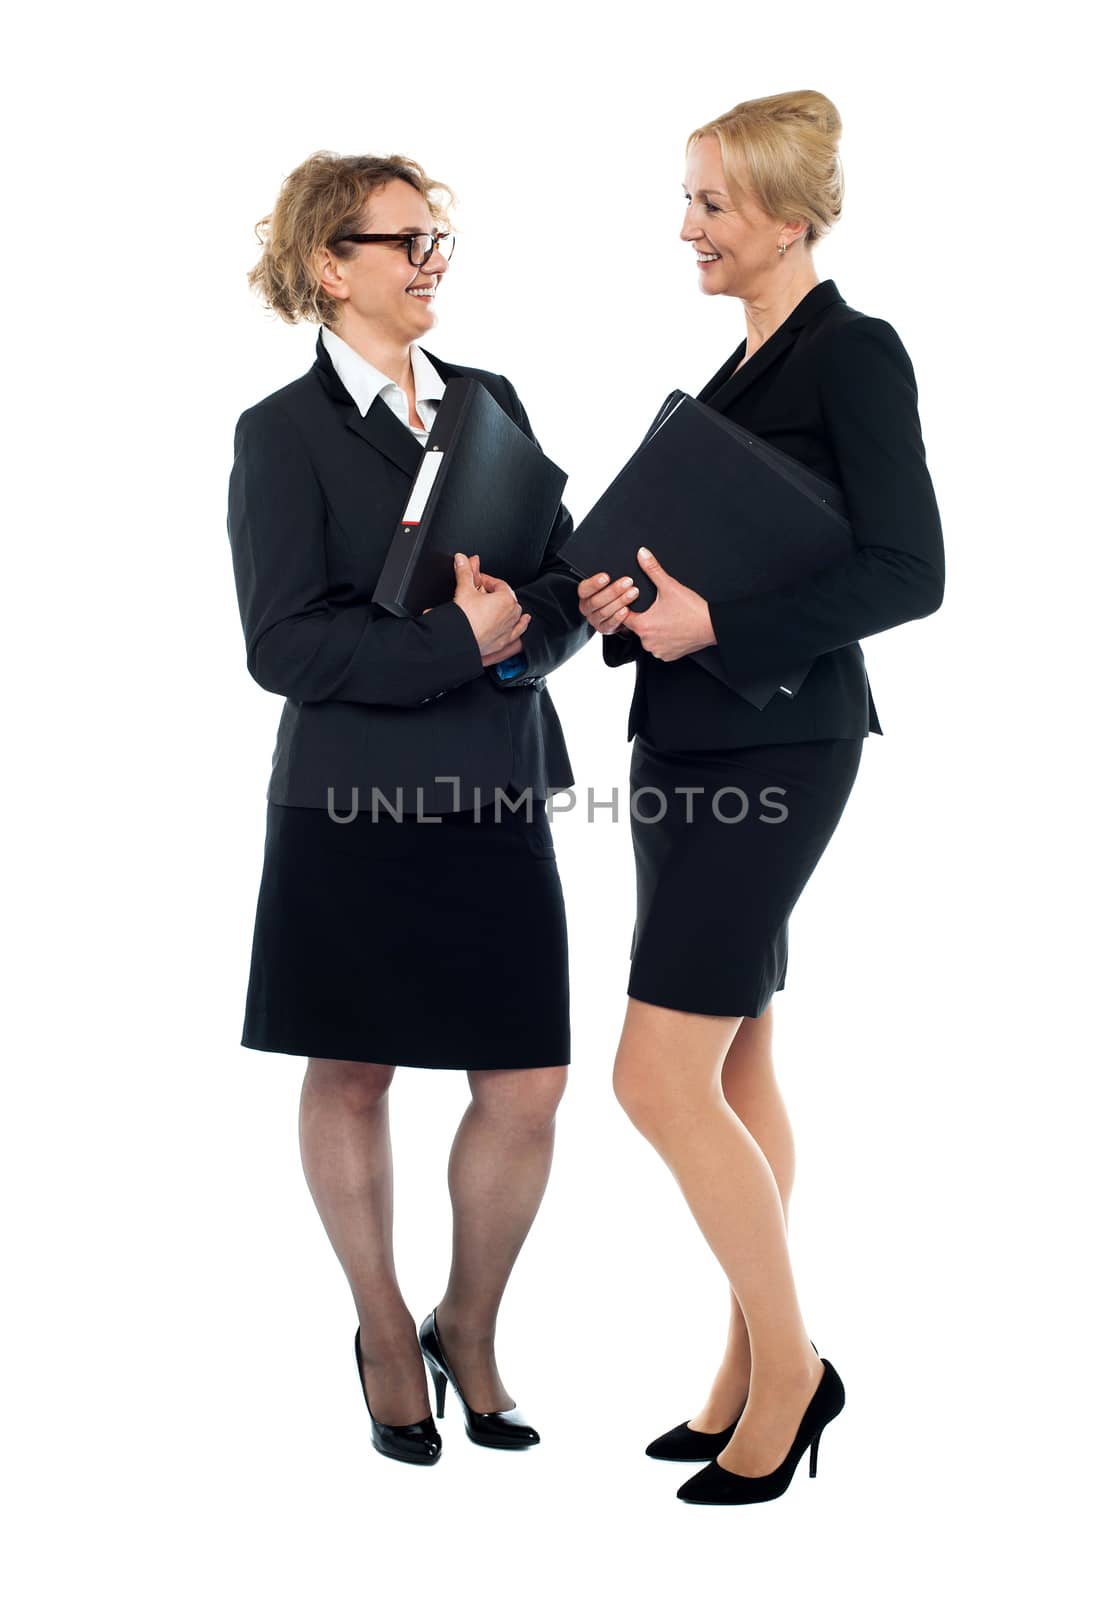 Corporate women interacting with each other by stockyimages